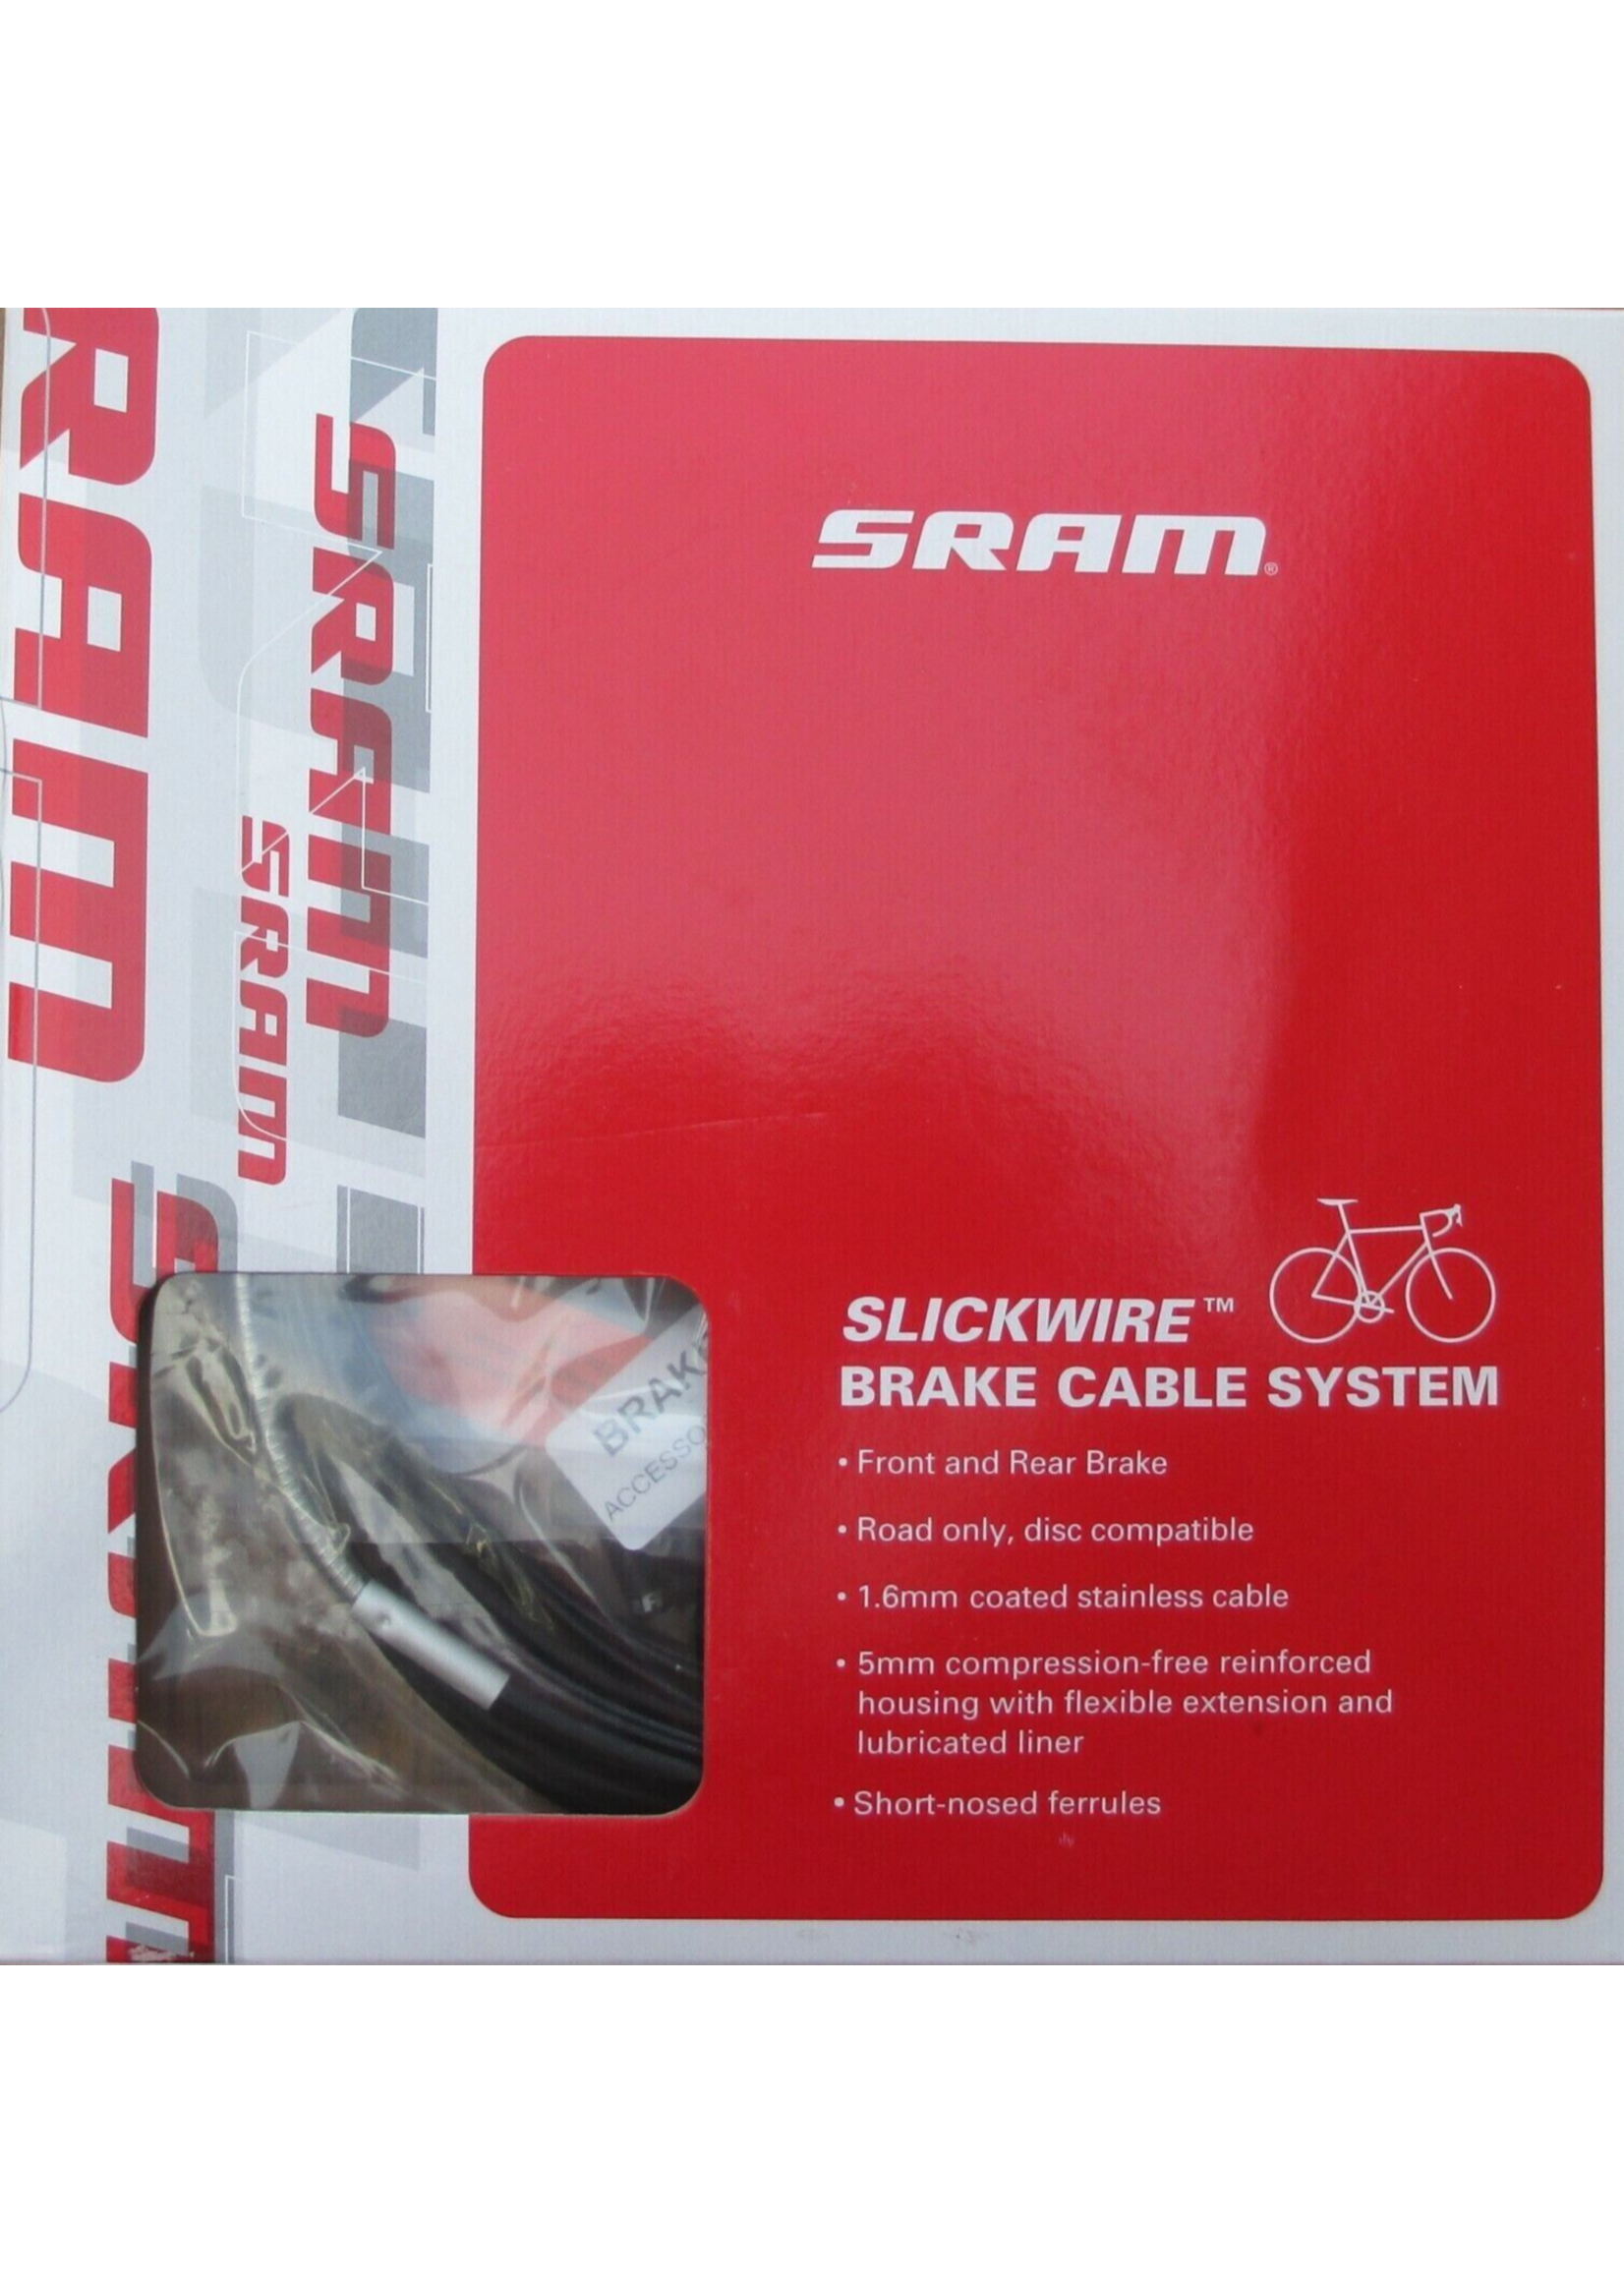 SRAM SRAM SlickWire XL Road Brake Cable Kit Black 5mm (1.6mm coated cable, 5mm Kevlar reinforced compression-free housing, ferrules, end caps, frame protectors)